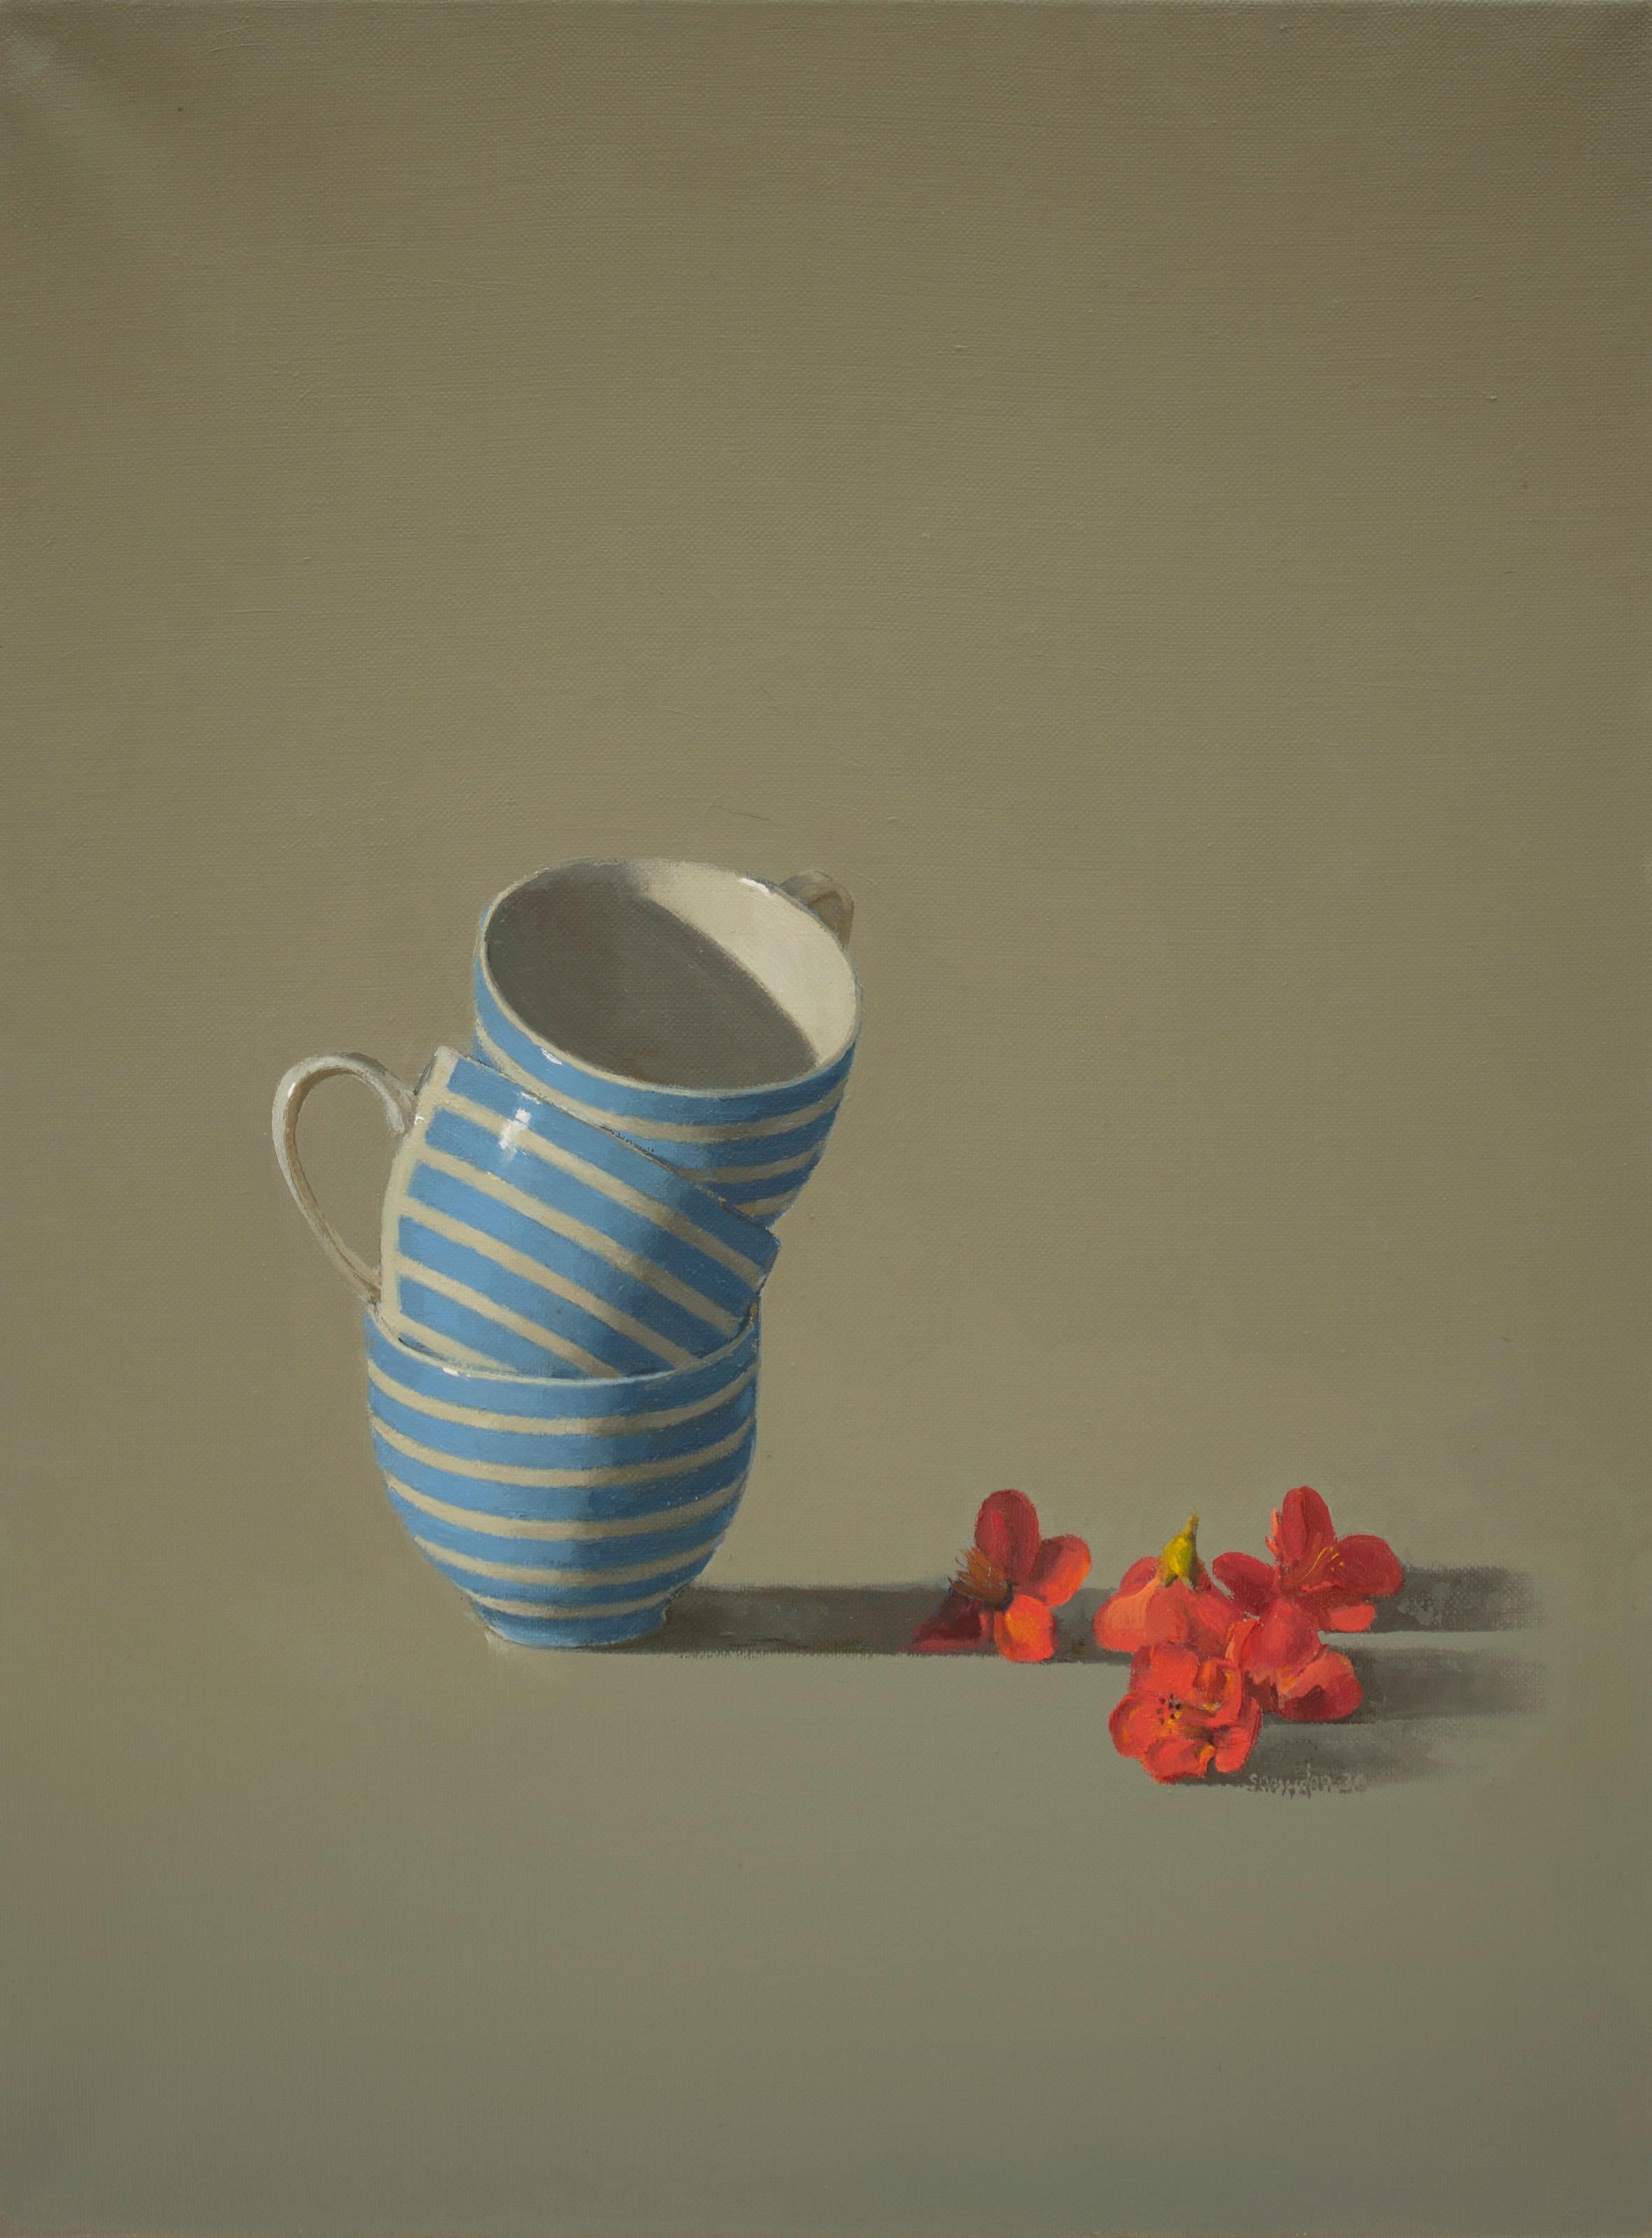 Original artwork by established Australian painter Tim Snowdon.
Striped cups with blossom, oil on linen, 23.8 inches x 21.4 inches, 2020

“I try to paint images that are interesting as tactile compositions. Sensual illusions. I want my paintings to